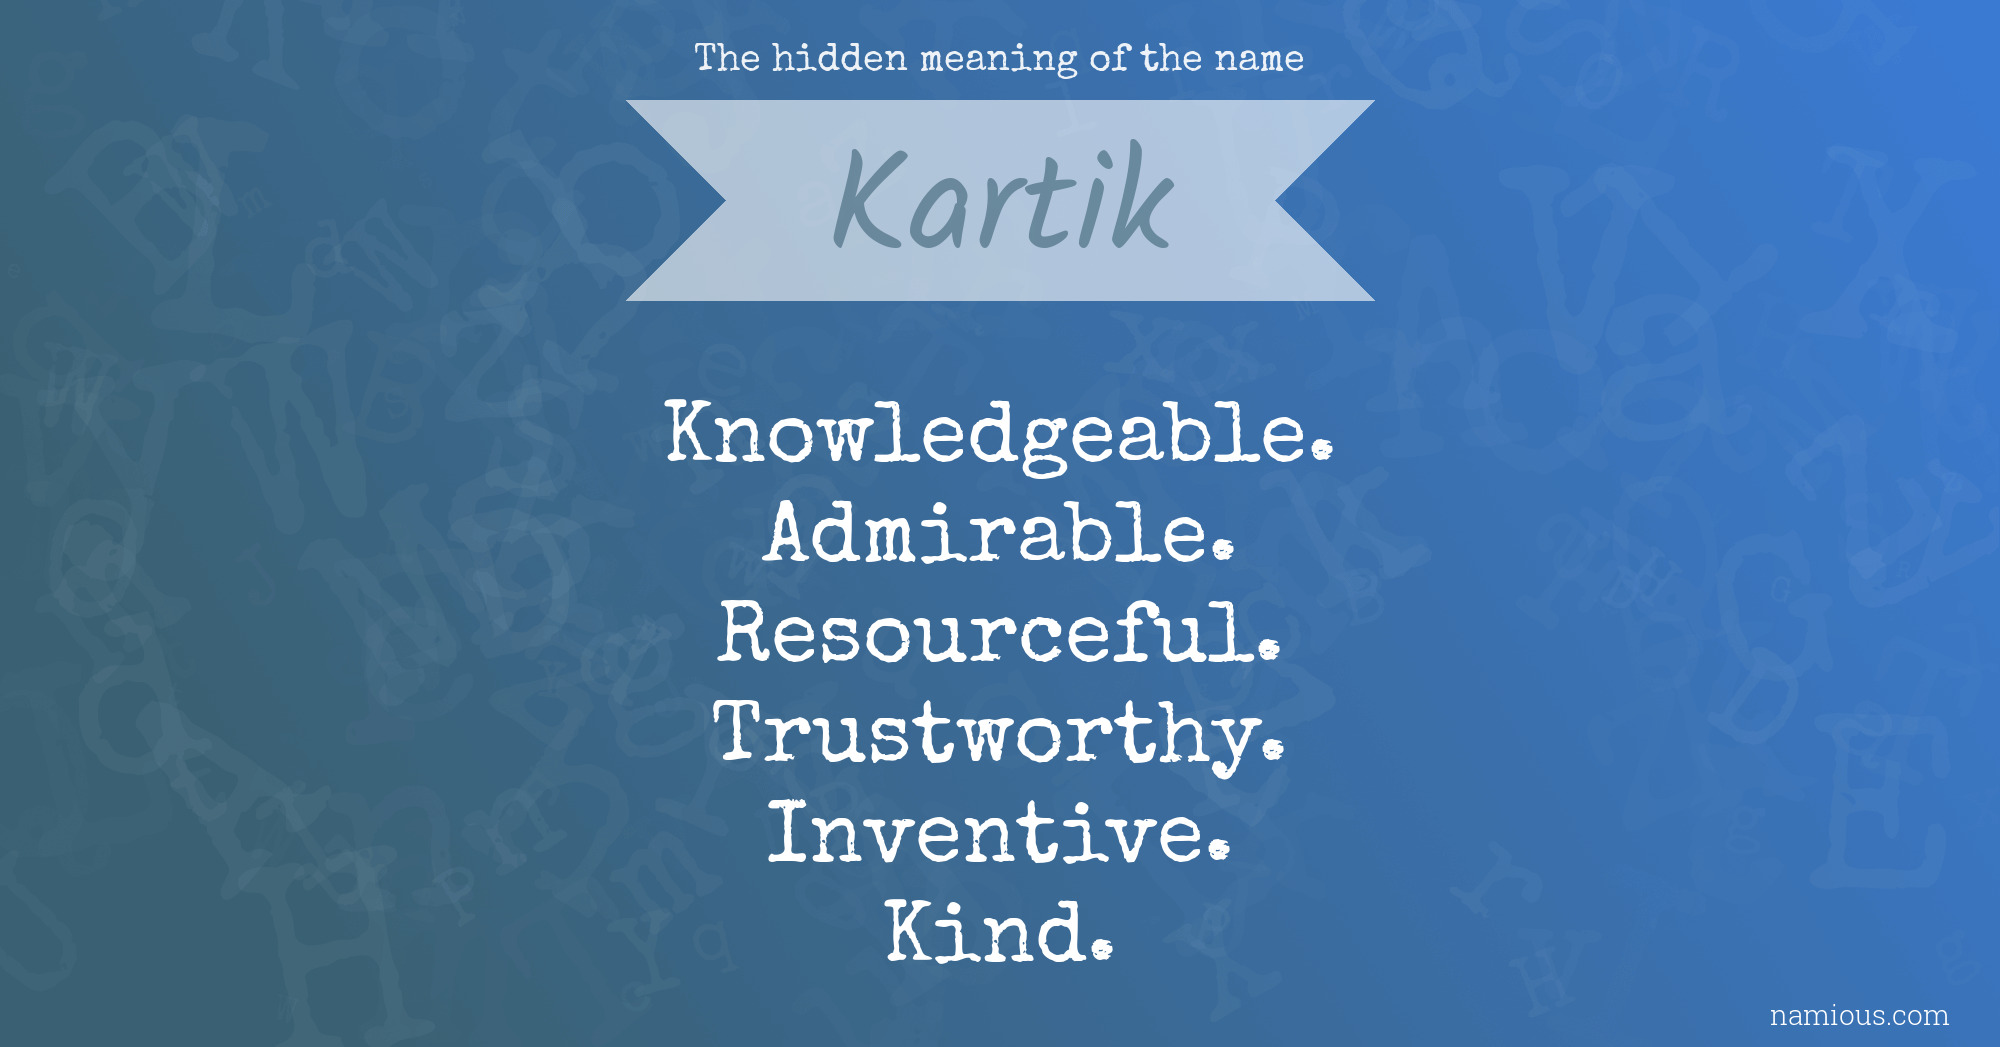 The hidden meaning of the name Kartik